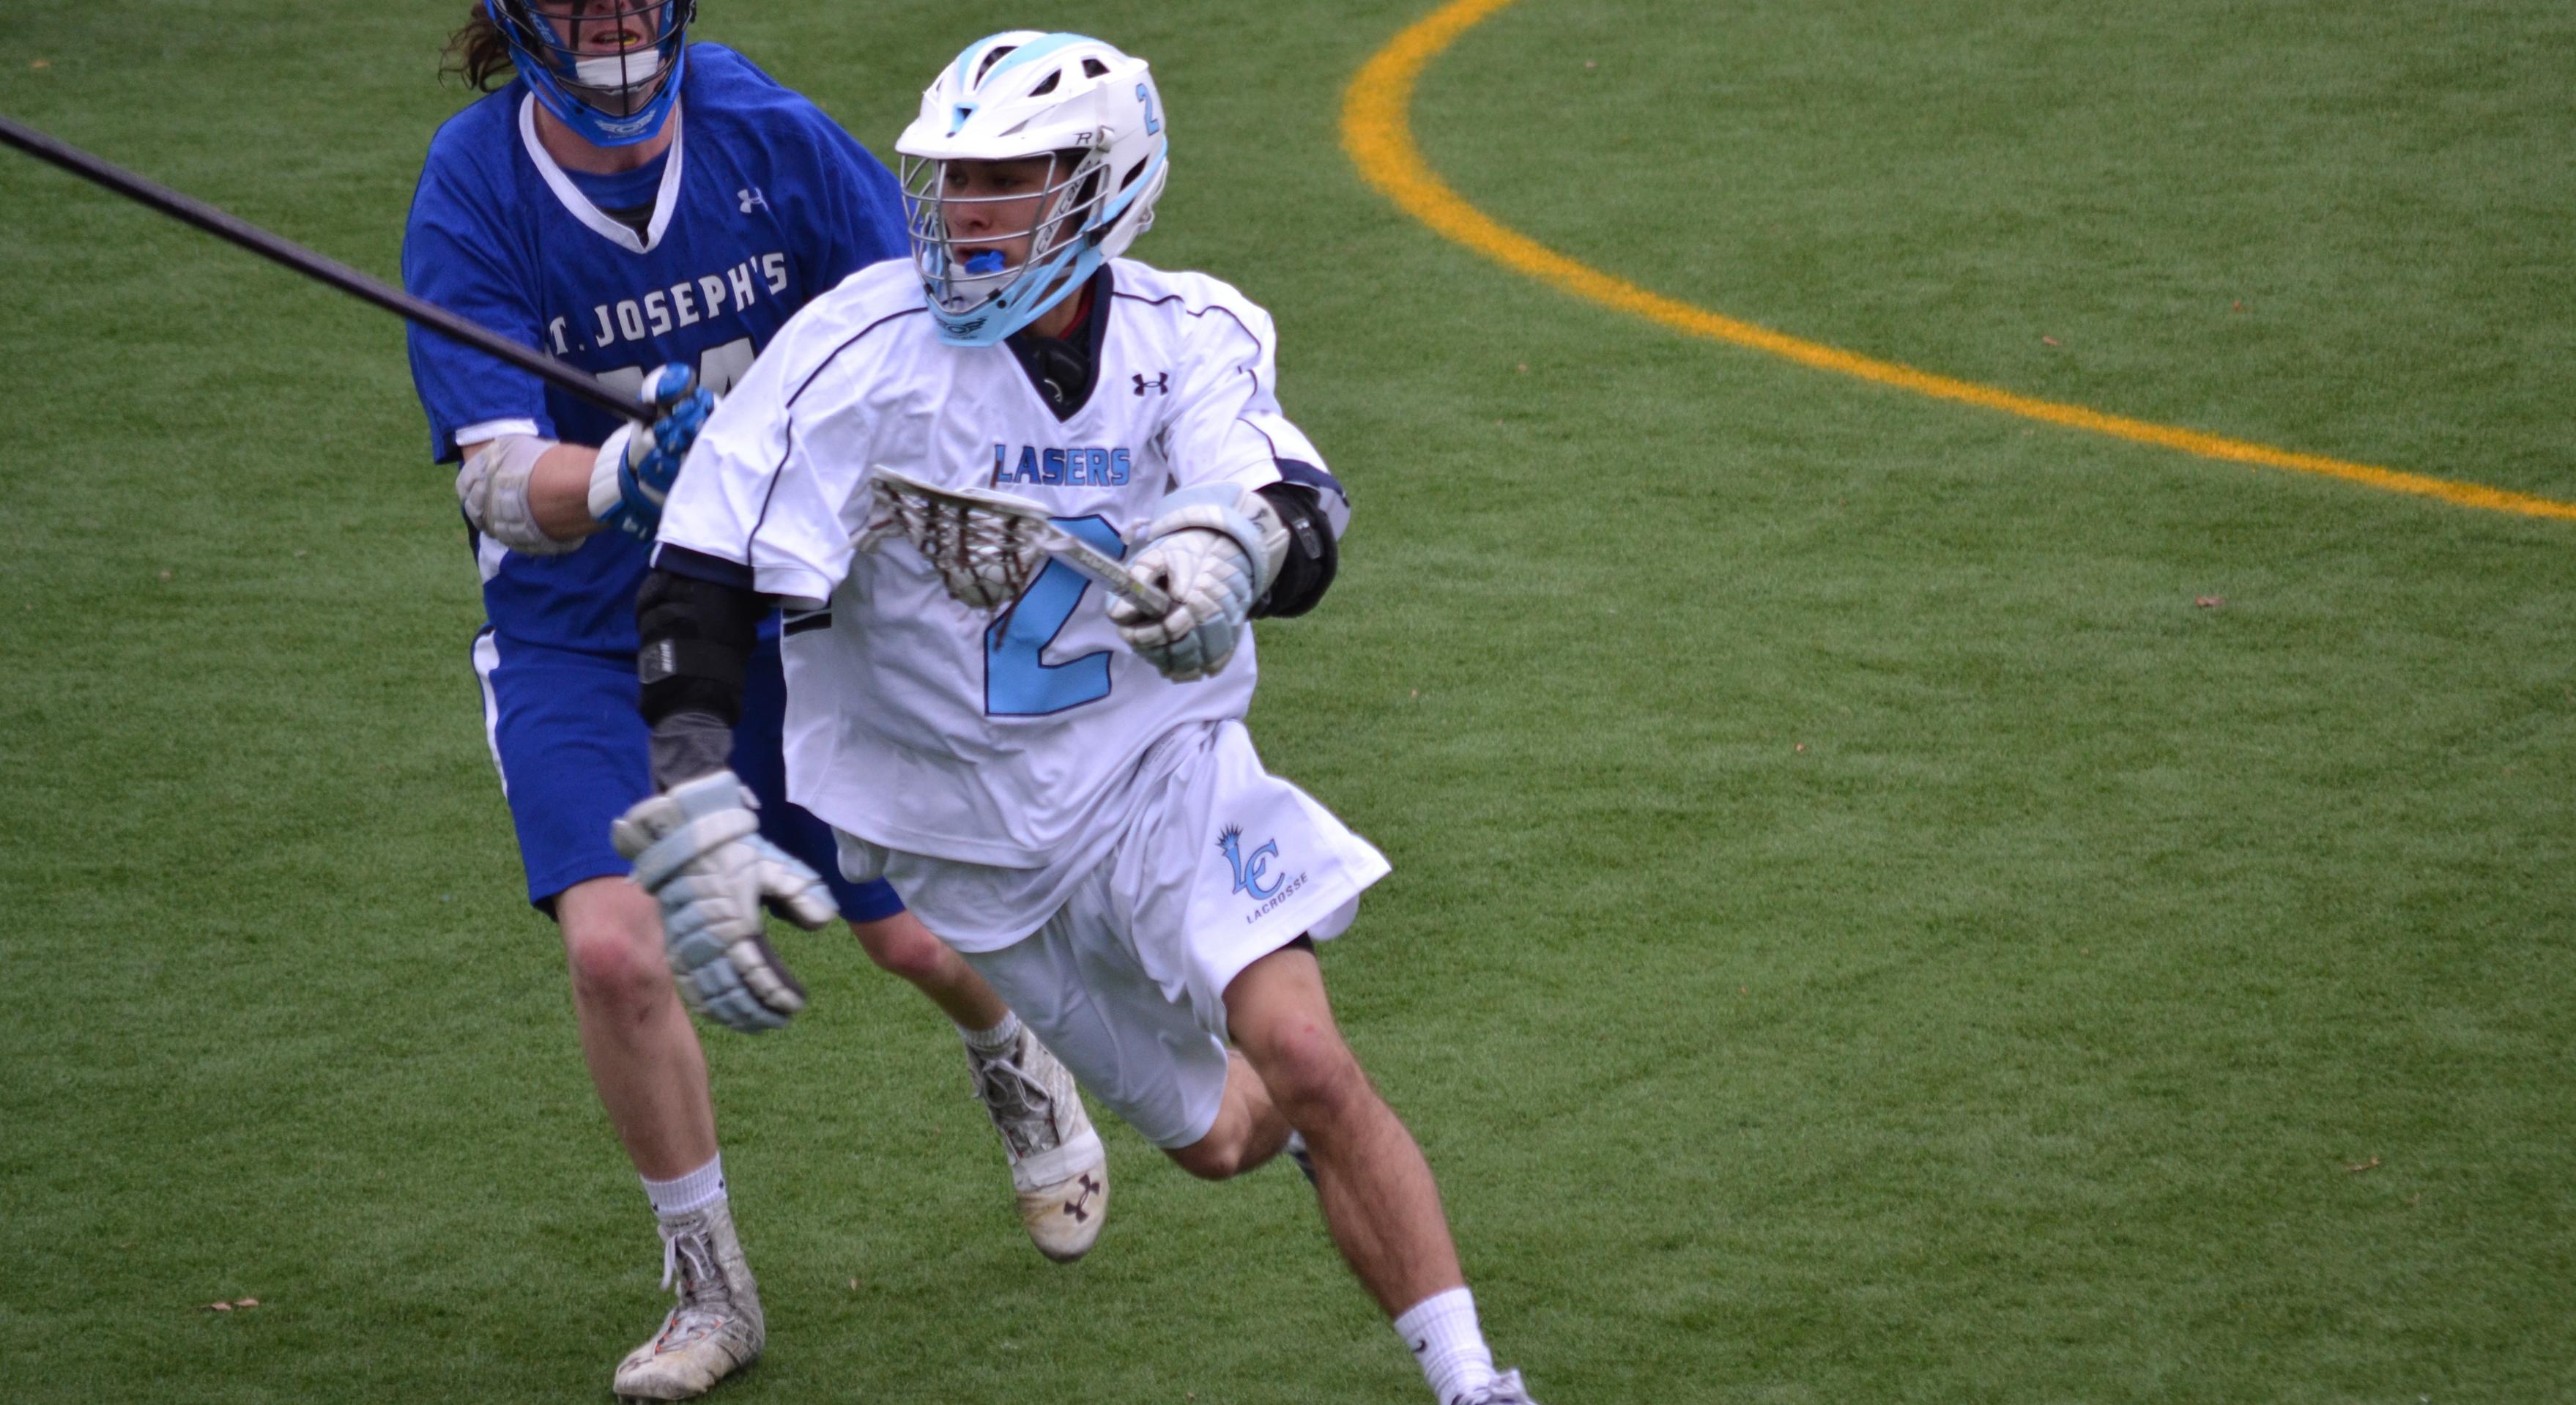 Men's Lax Shakes off Slow Start to Roll 18-5 at JWU